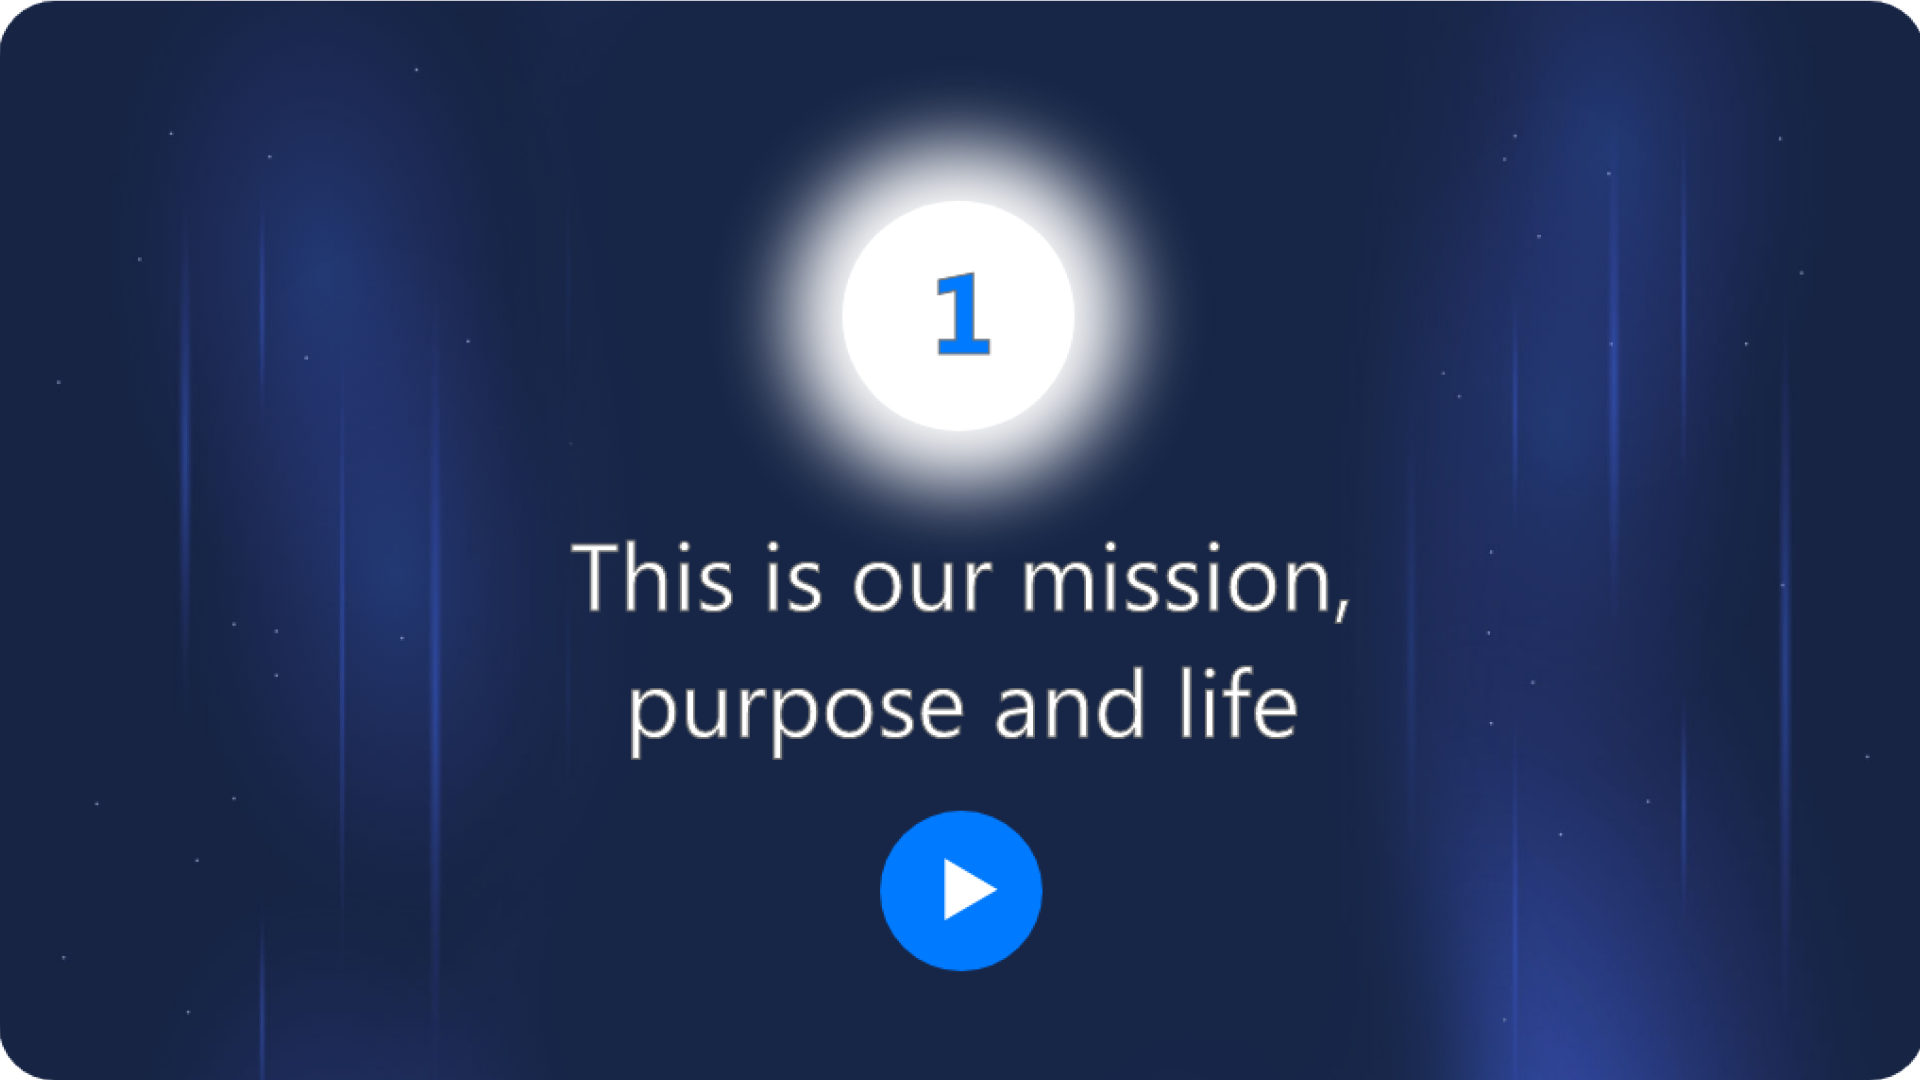 This is our mission, purpose and life